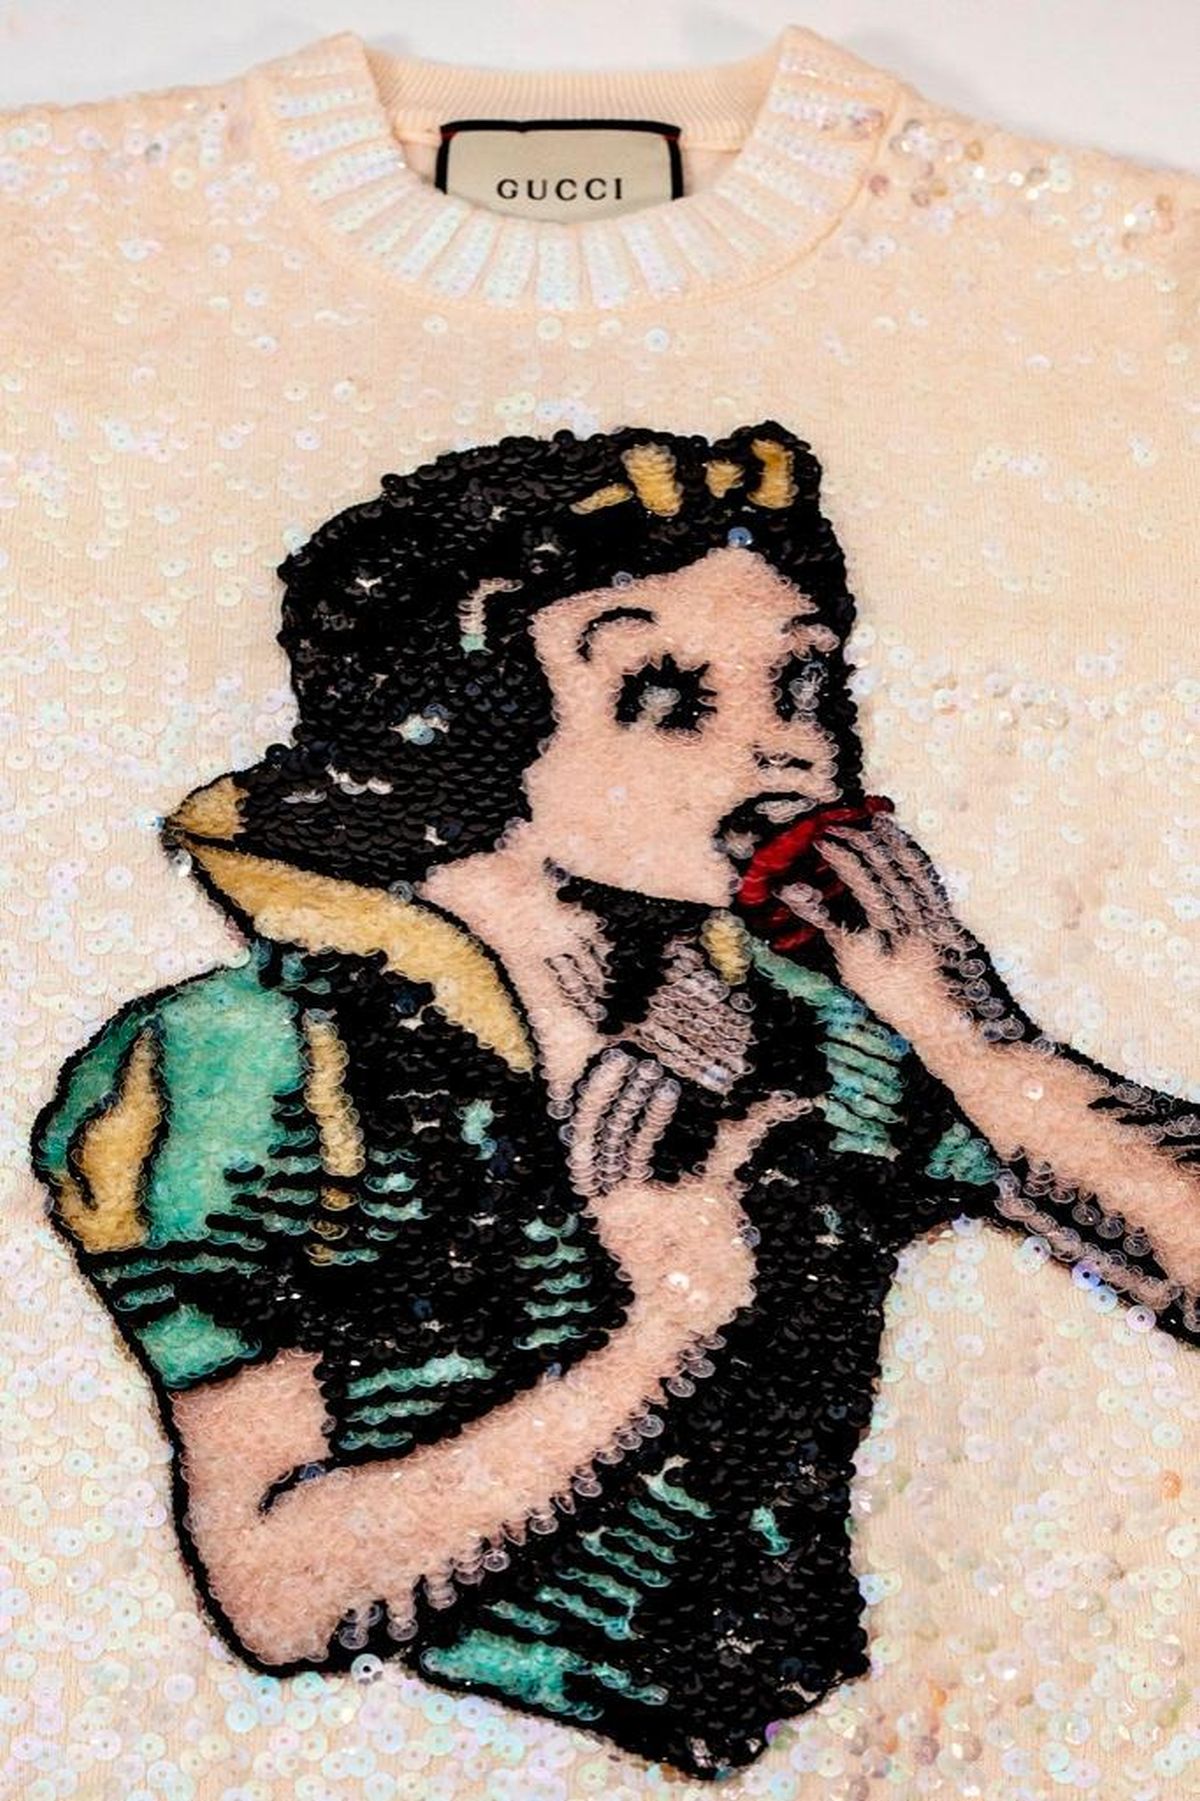 Gucci X Disney Sequin Embellished Snow White Sweater - Image 2 of 9